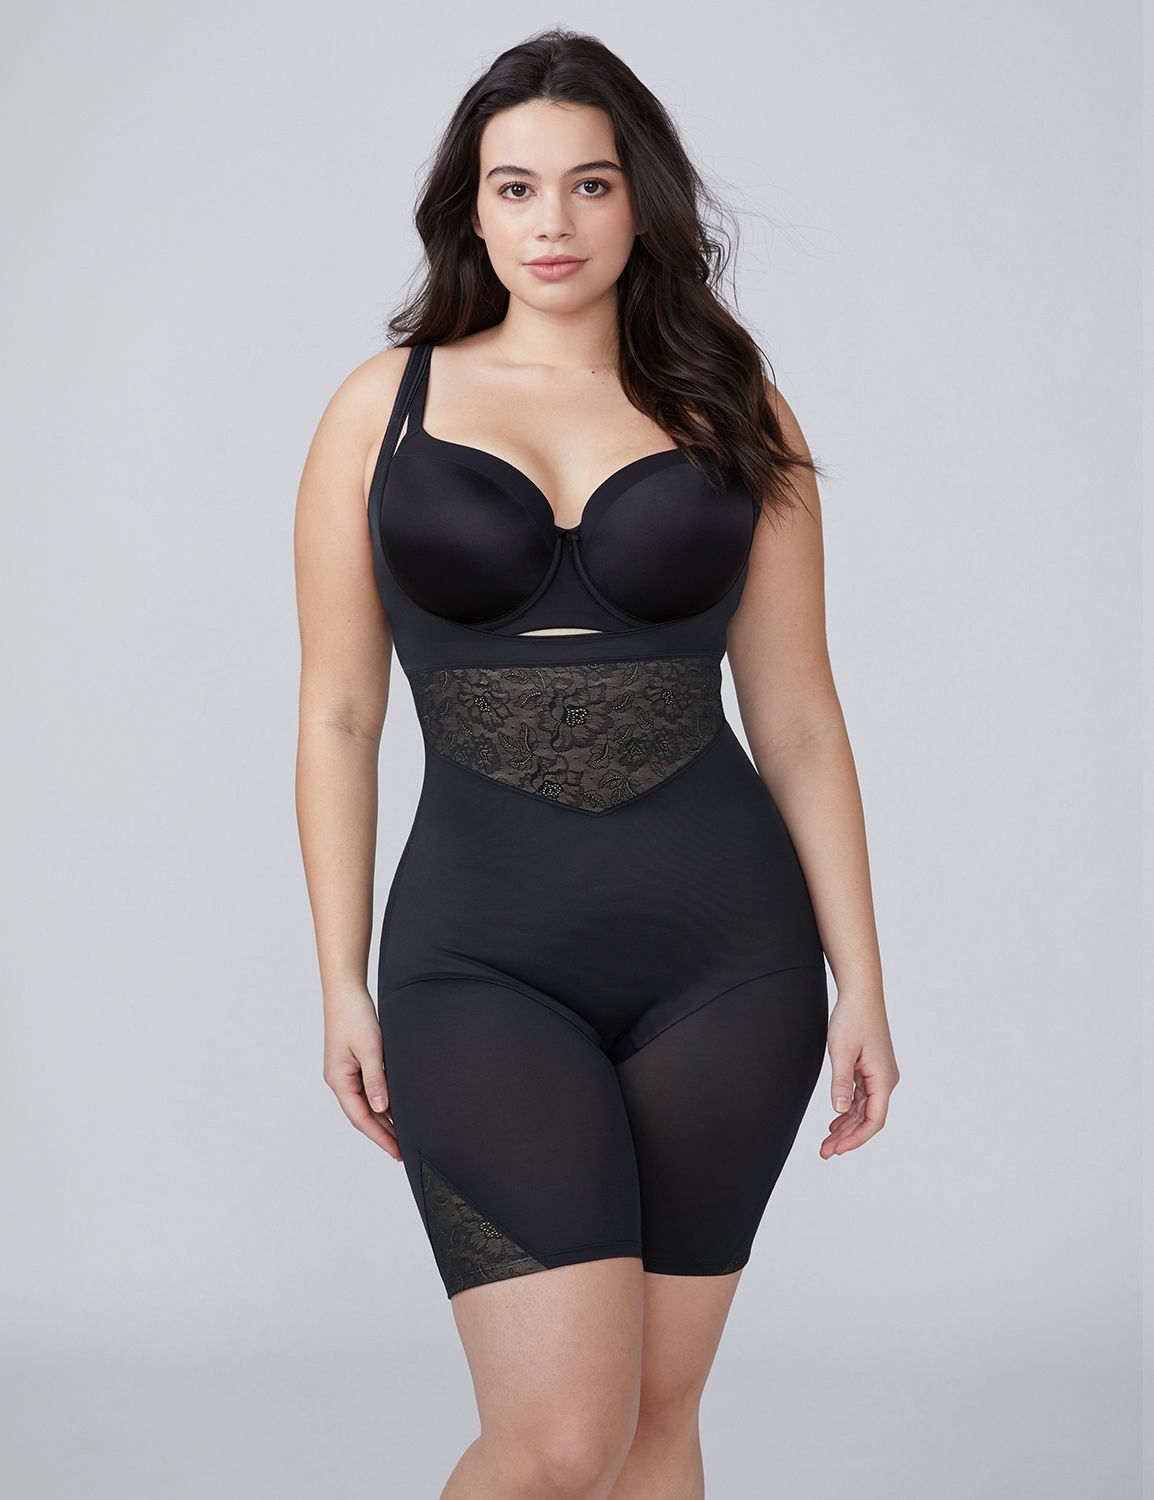 Lane Bryant Womens Shape By Cacique Open-Bust Thigh Shaper 26/28